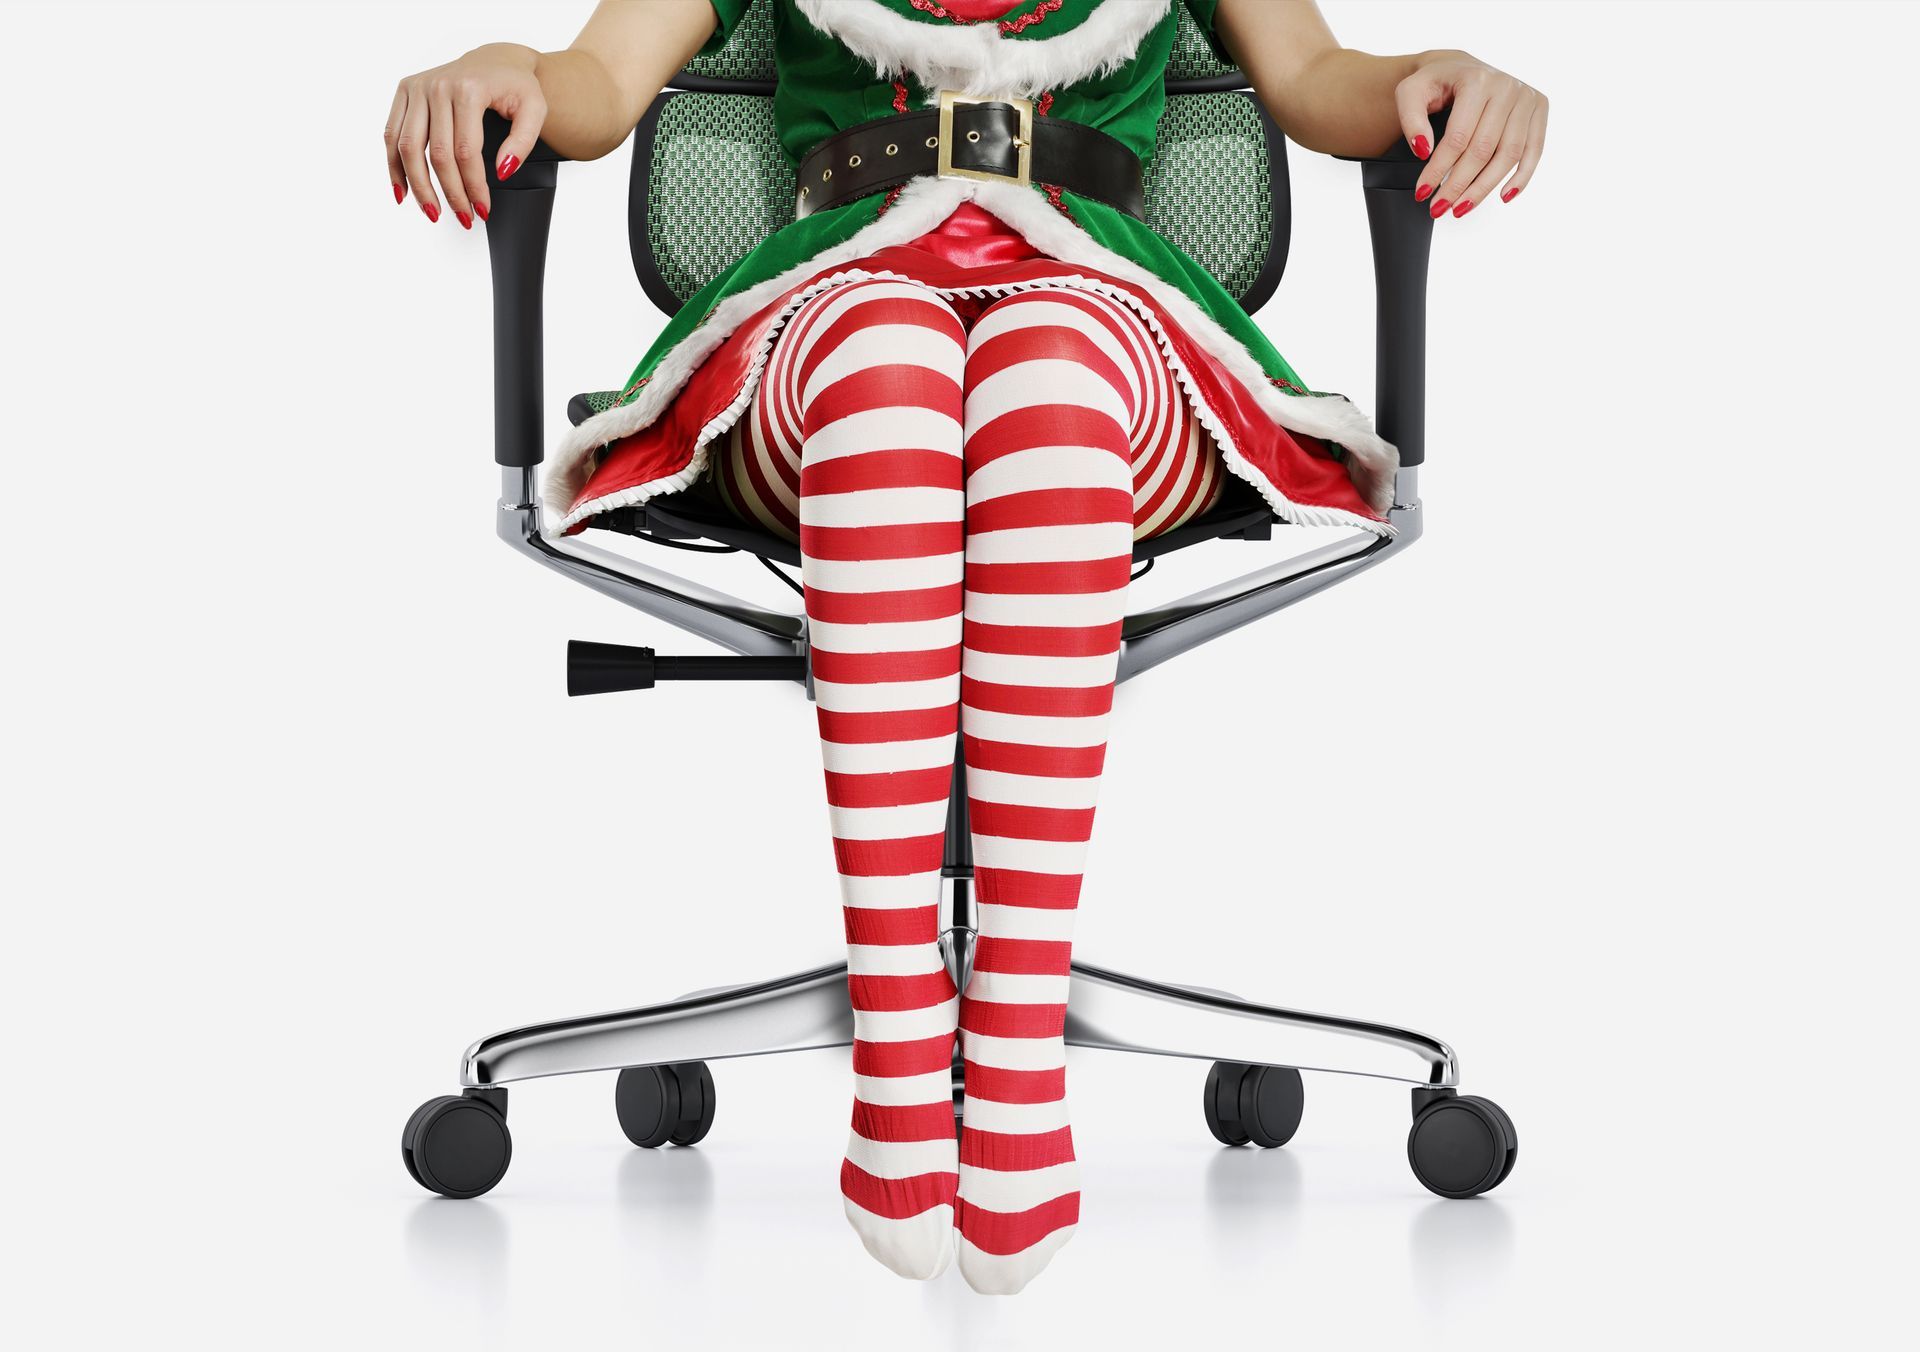 a lady wearing candy cane tights and a green elf-style dress sitting in a comfort ergohuman chair